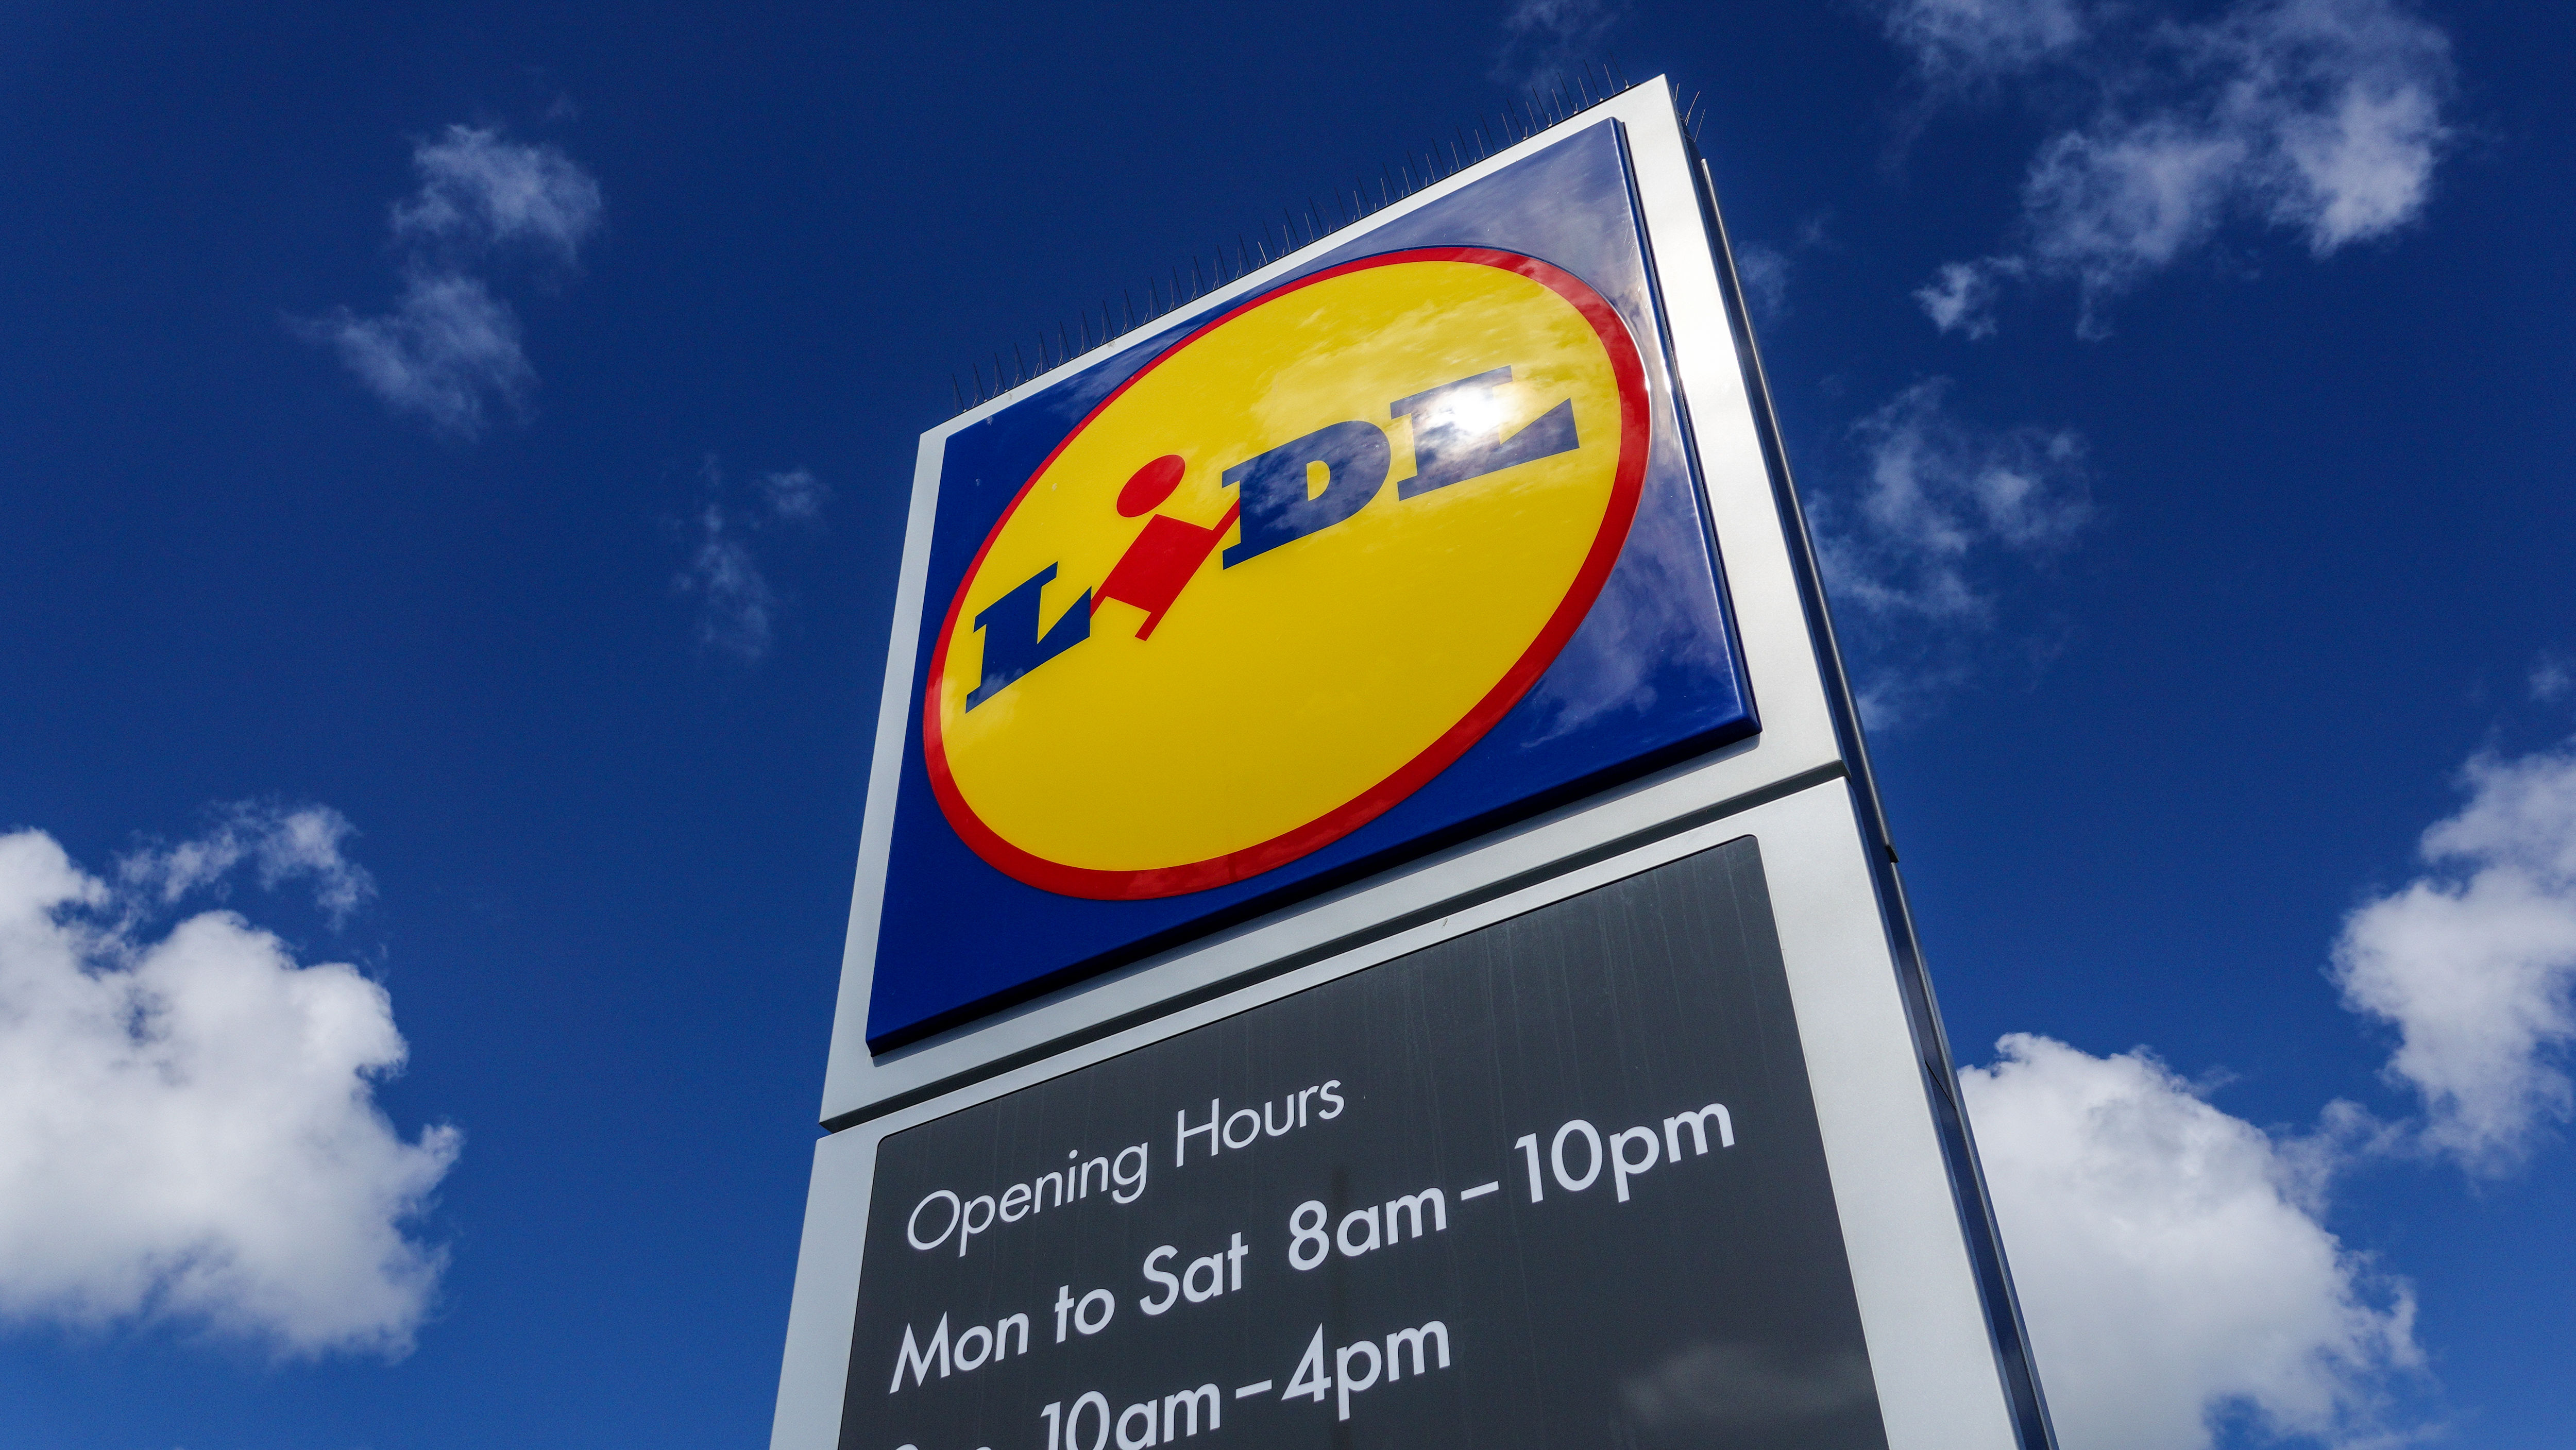 A sign with the logo of Lidl, a German discount grocery chain, gleams in the sun against a blue sky.